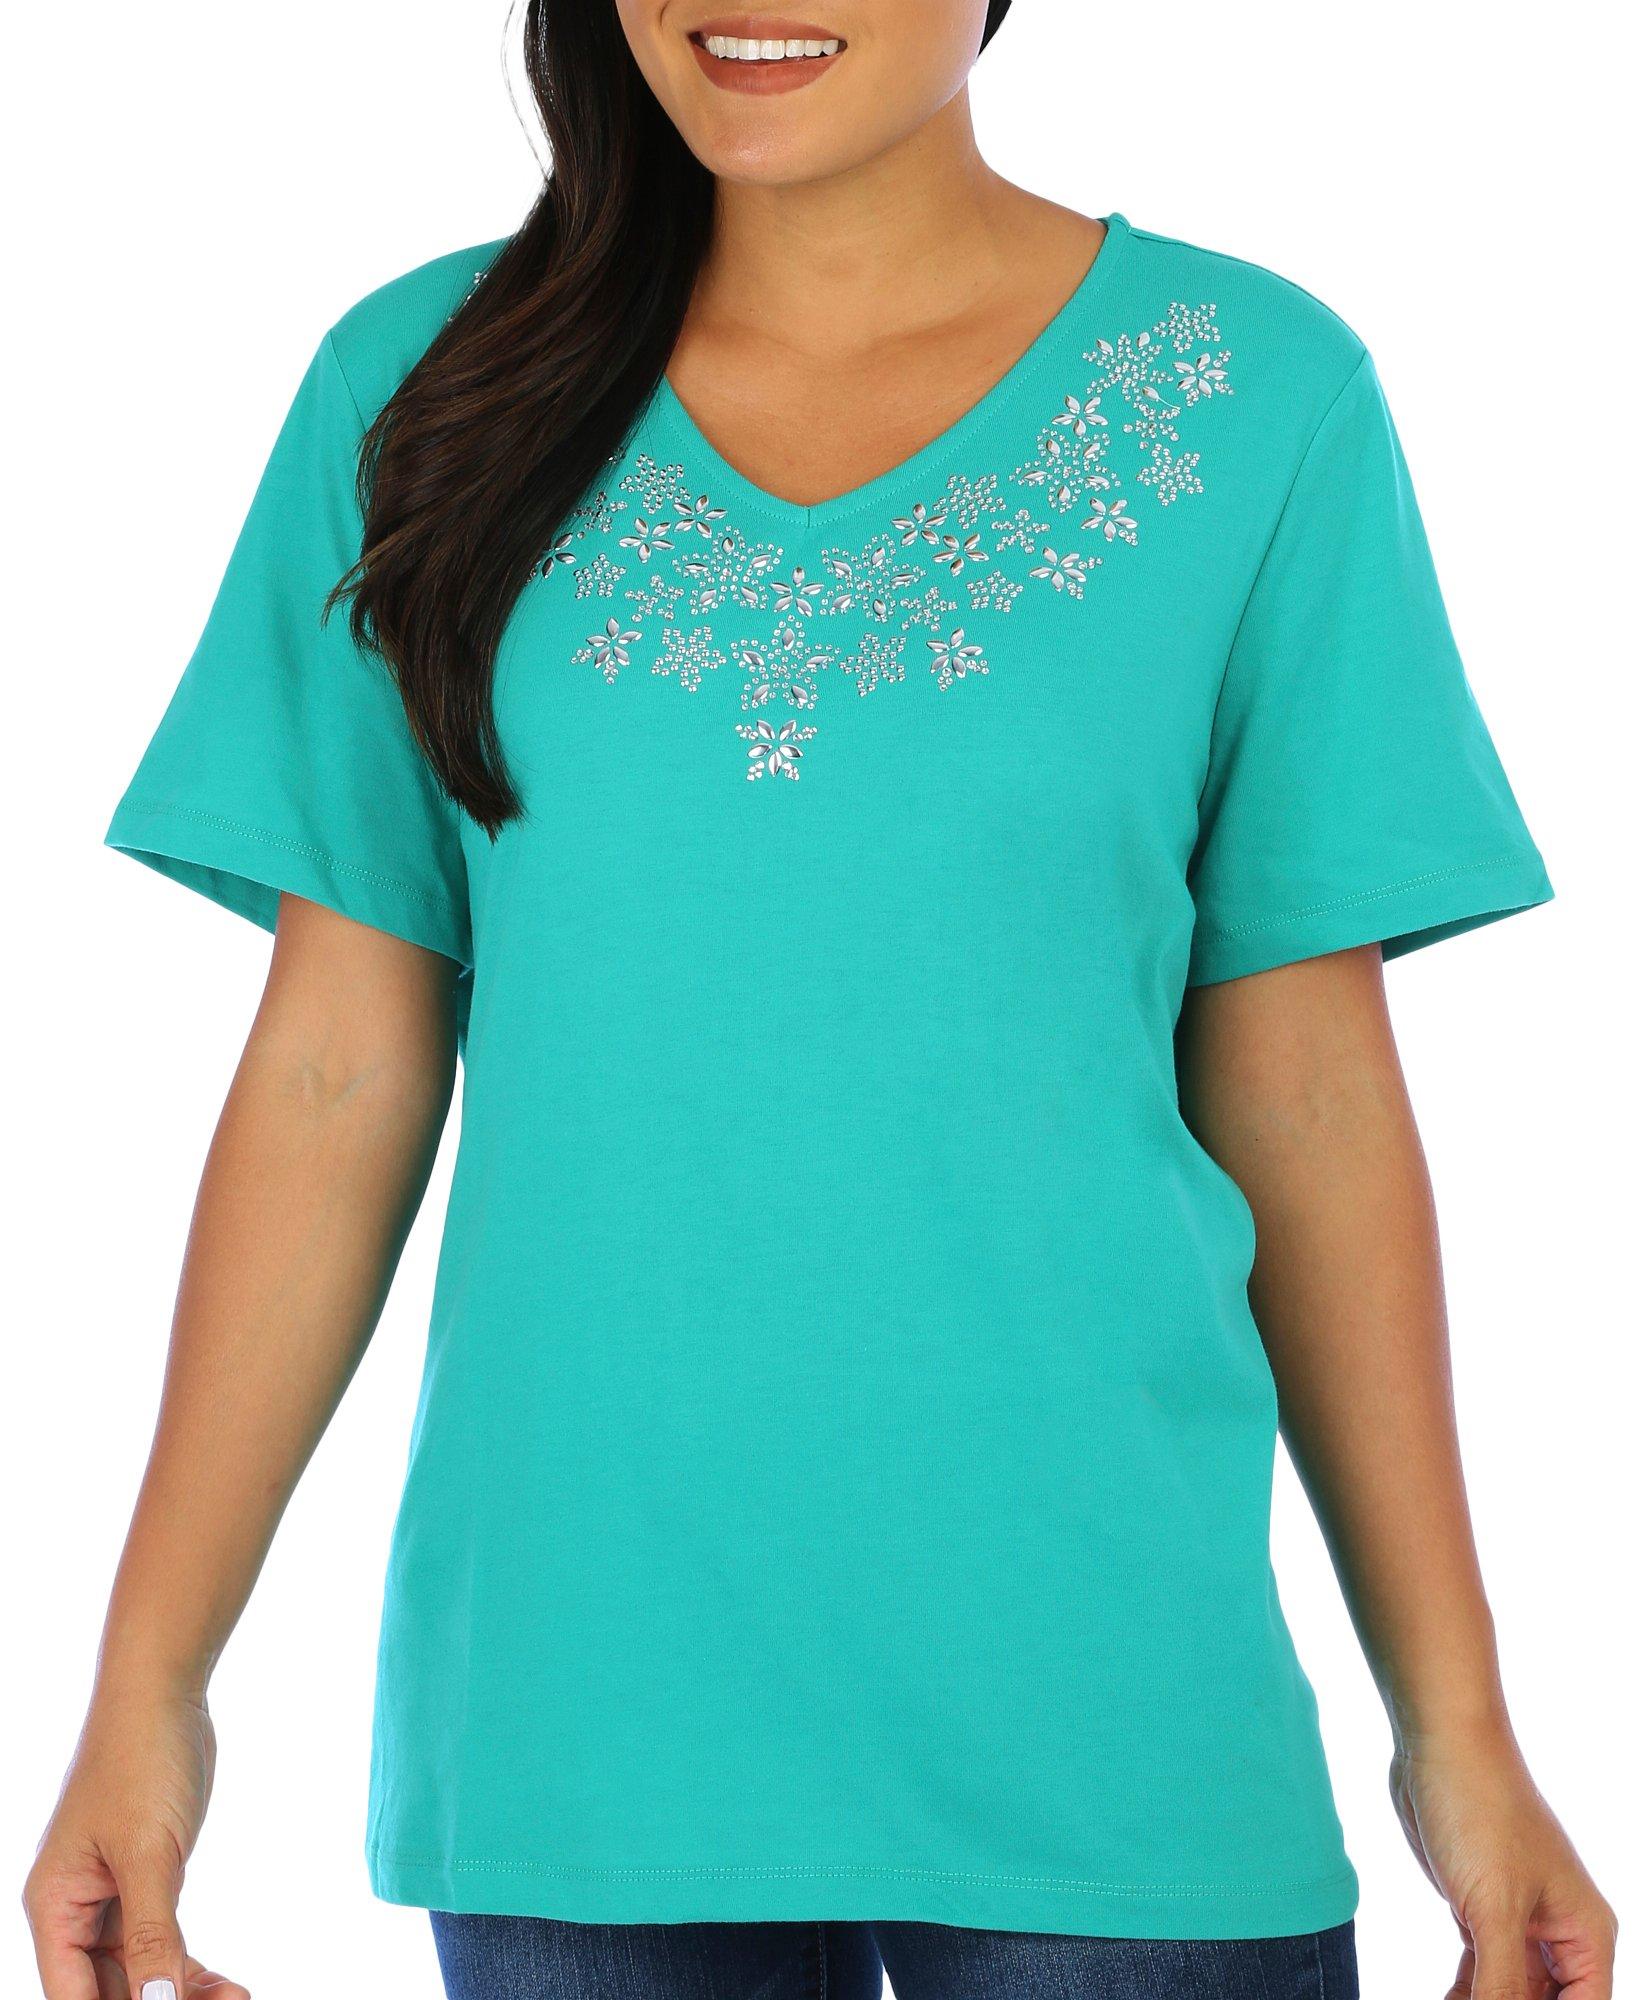 Coral Bay Womens Solid Jeweled V Neck Short Sleeve Top